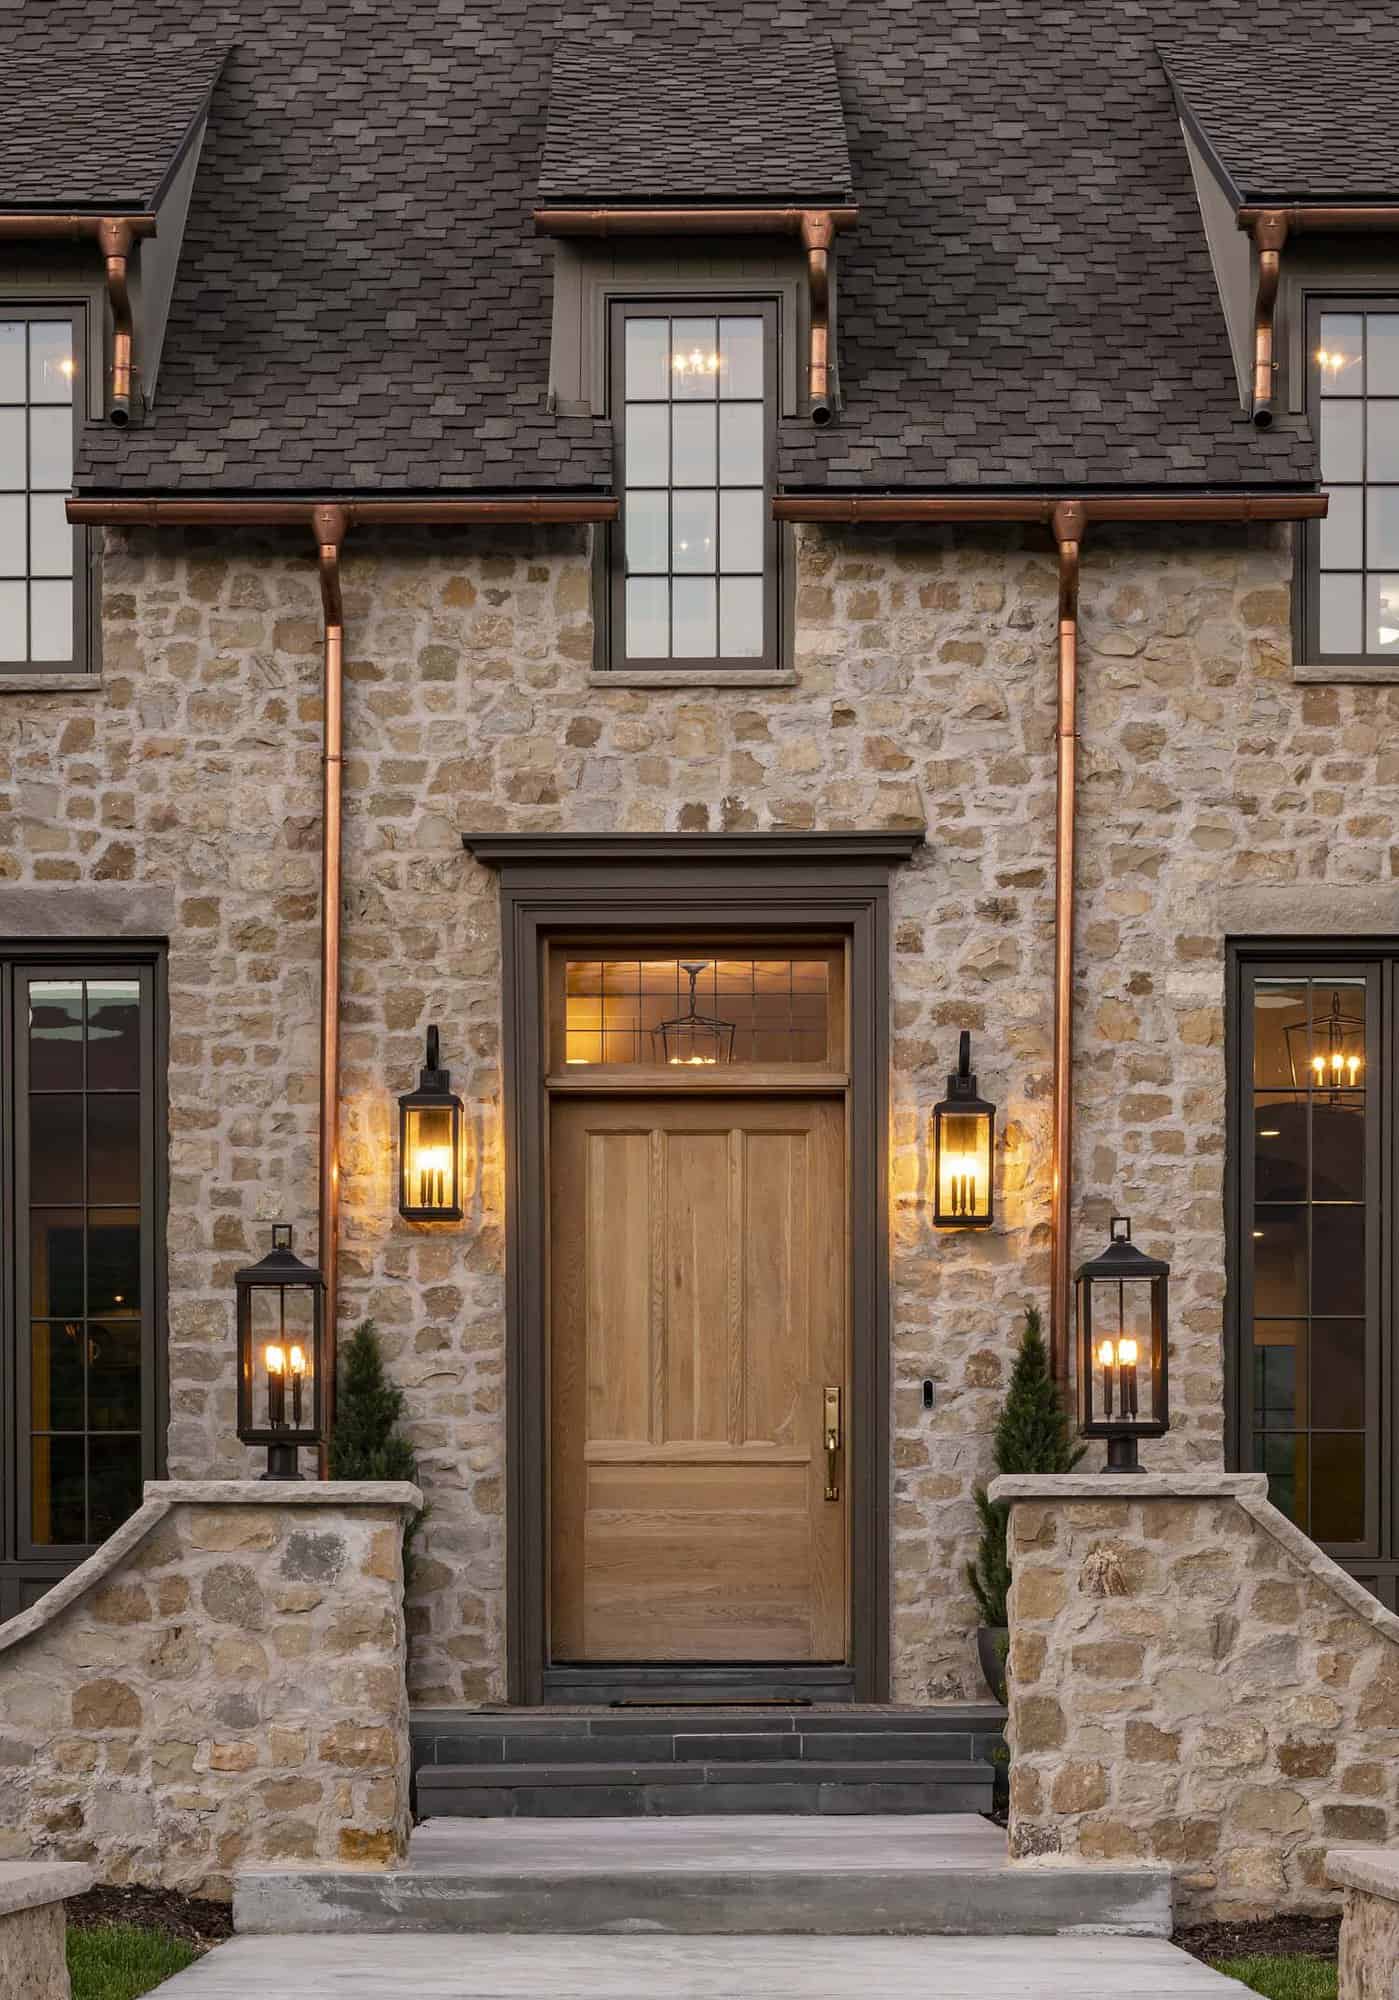 English country style home exterior entry